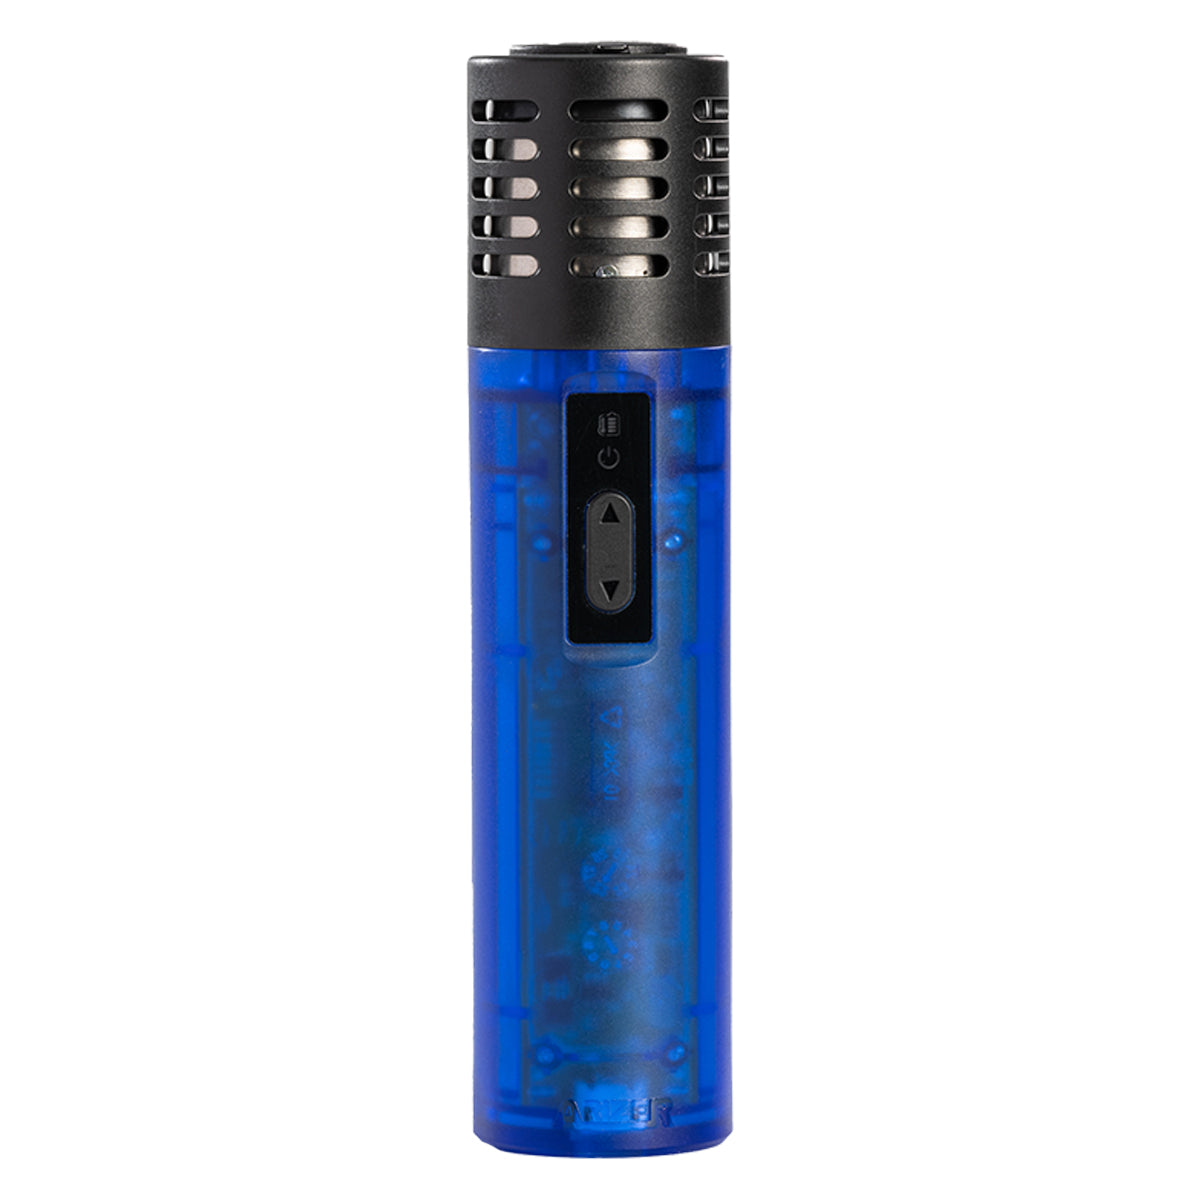 Arizer Air SE Vaporizer - $89.95 + Free Shipping - Planet Of The Vapes